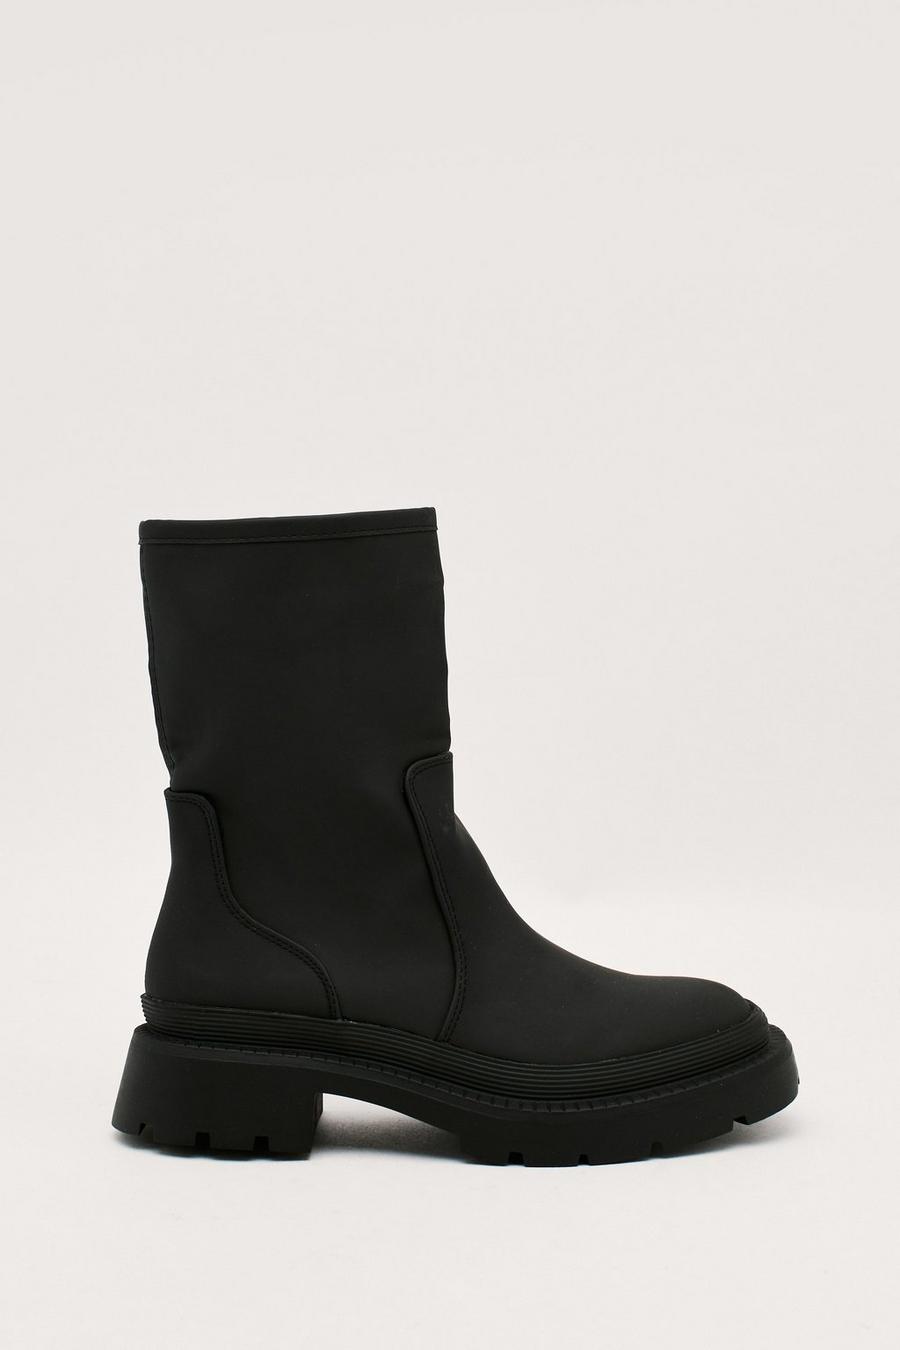 Cleated Low Heel Ankle Wellie Boots